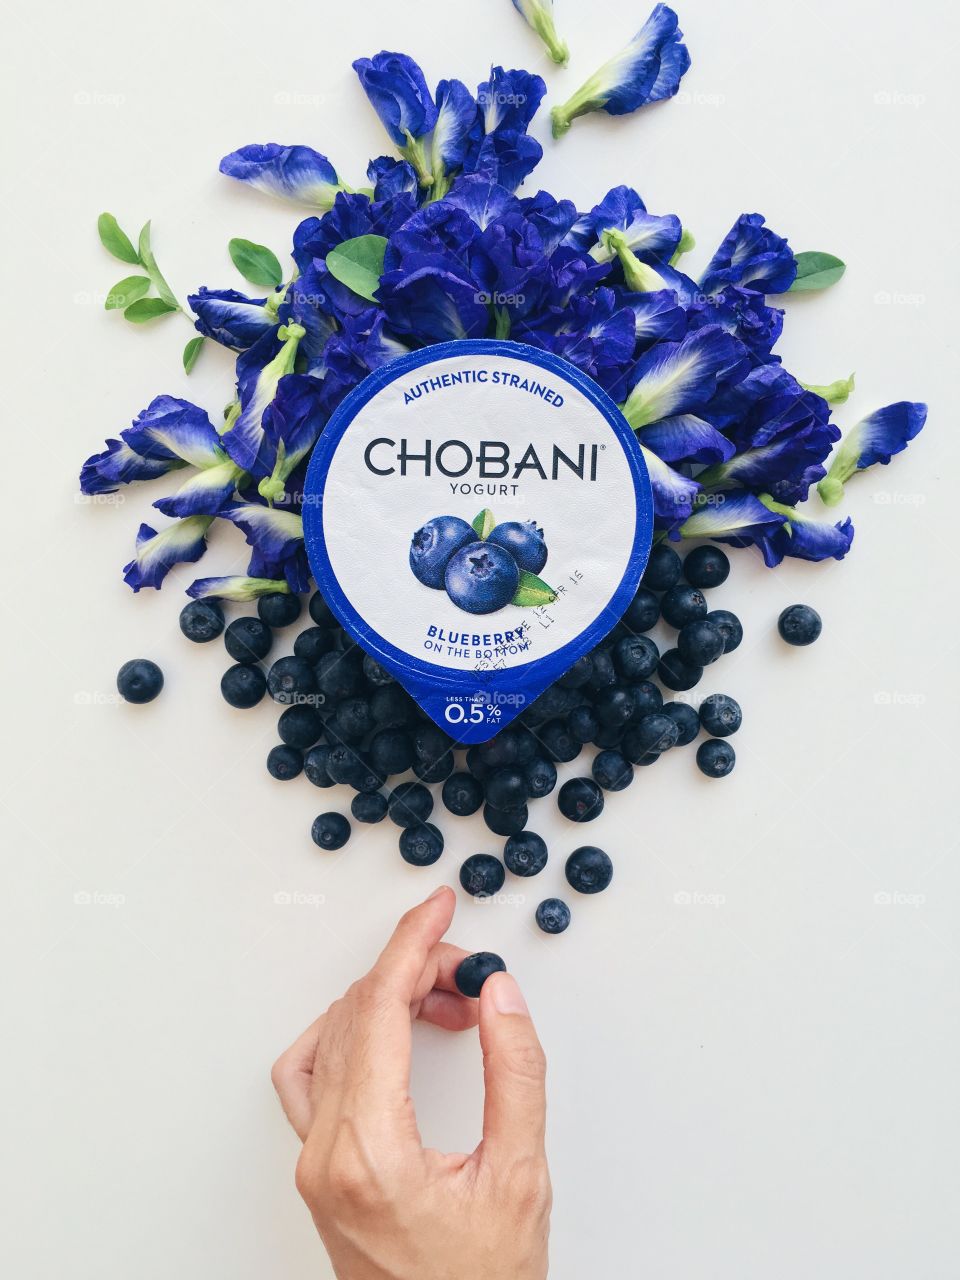 CHOBANI in Amazing Sceneries : Chobani Blueberry with blueberries and blue butterfly pea flowers.